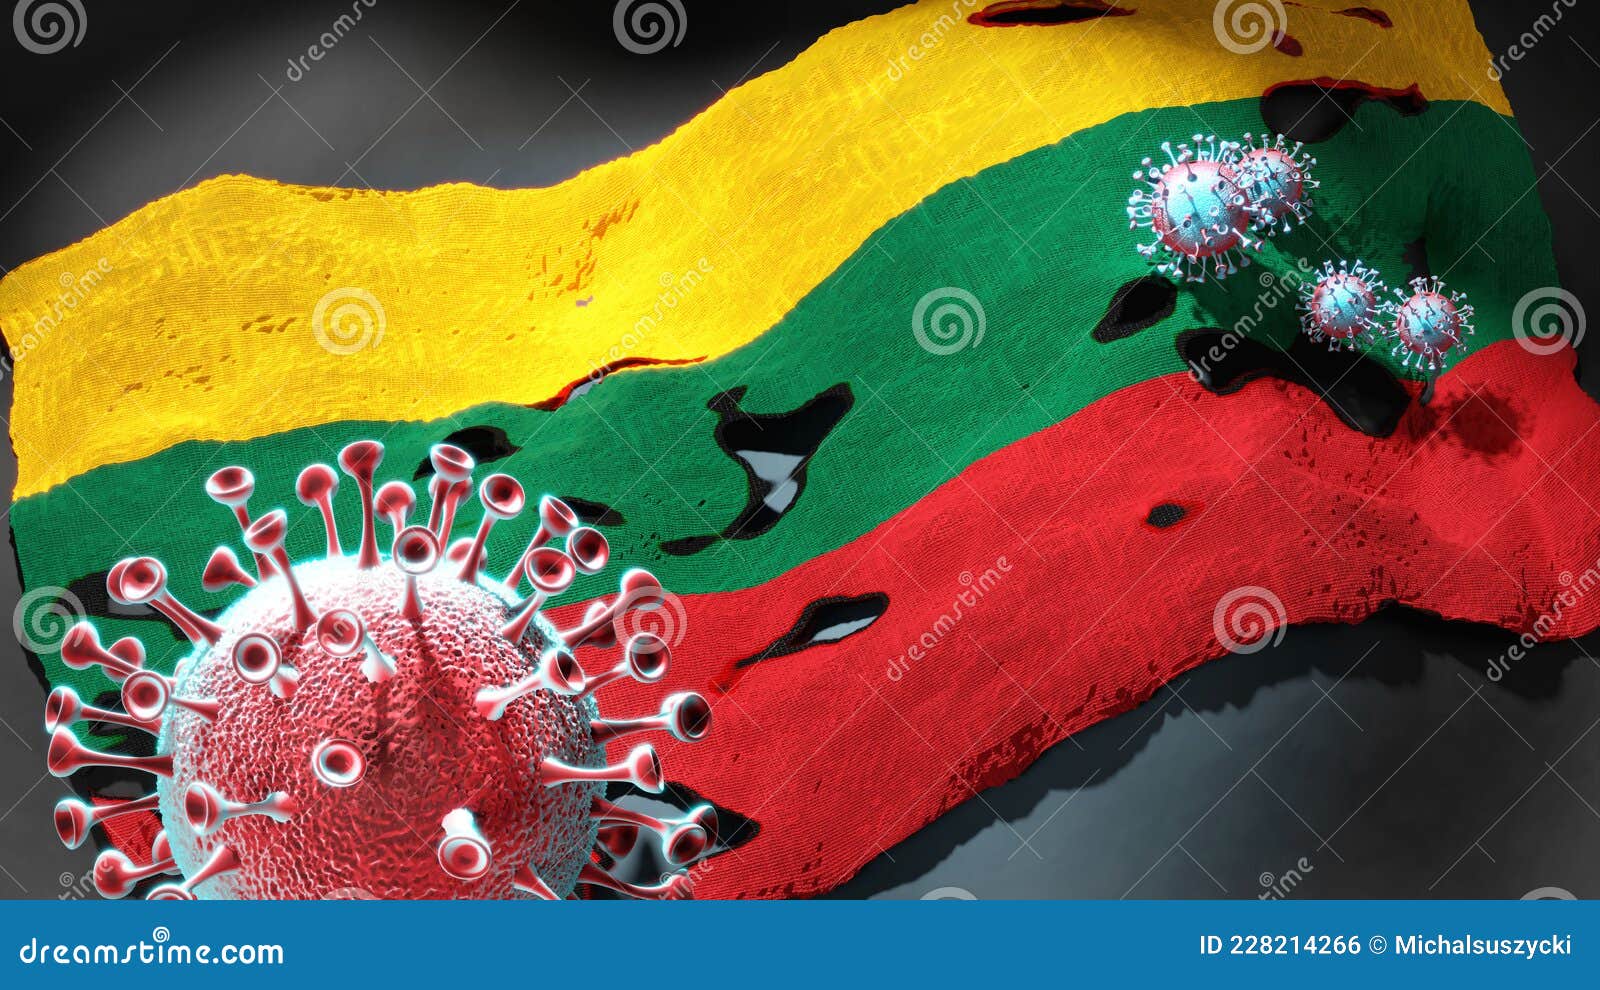 Covid in Lithuania - Coronavirus Attacking a National Flag of Lithuania ...